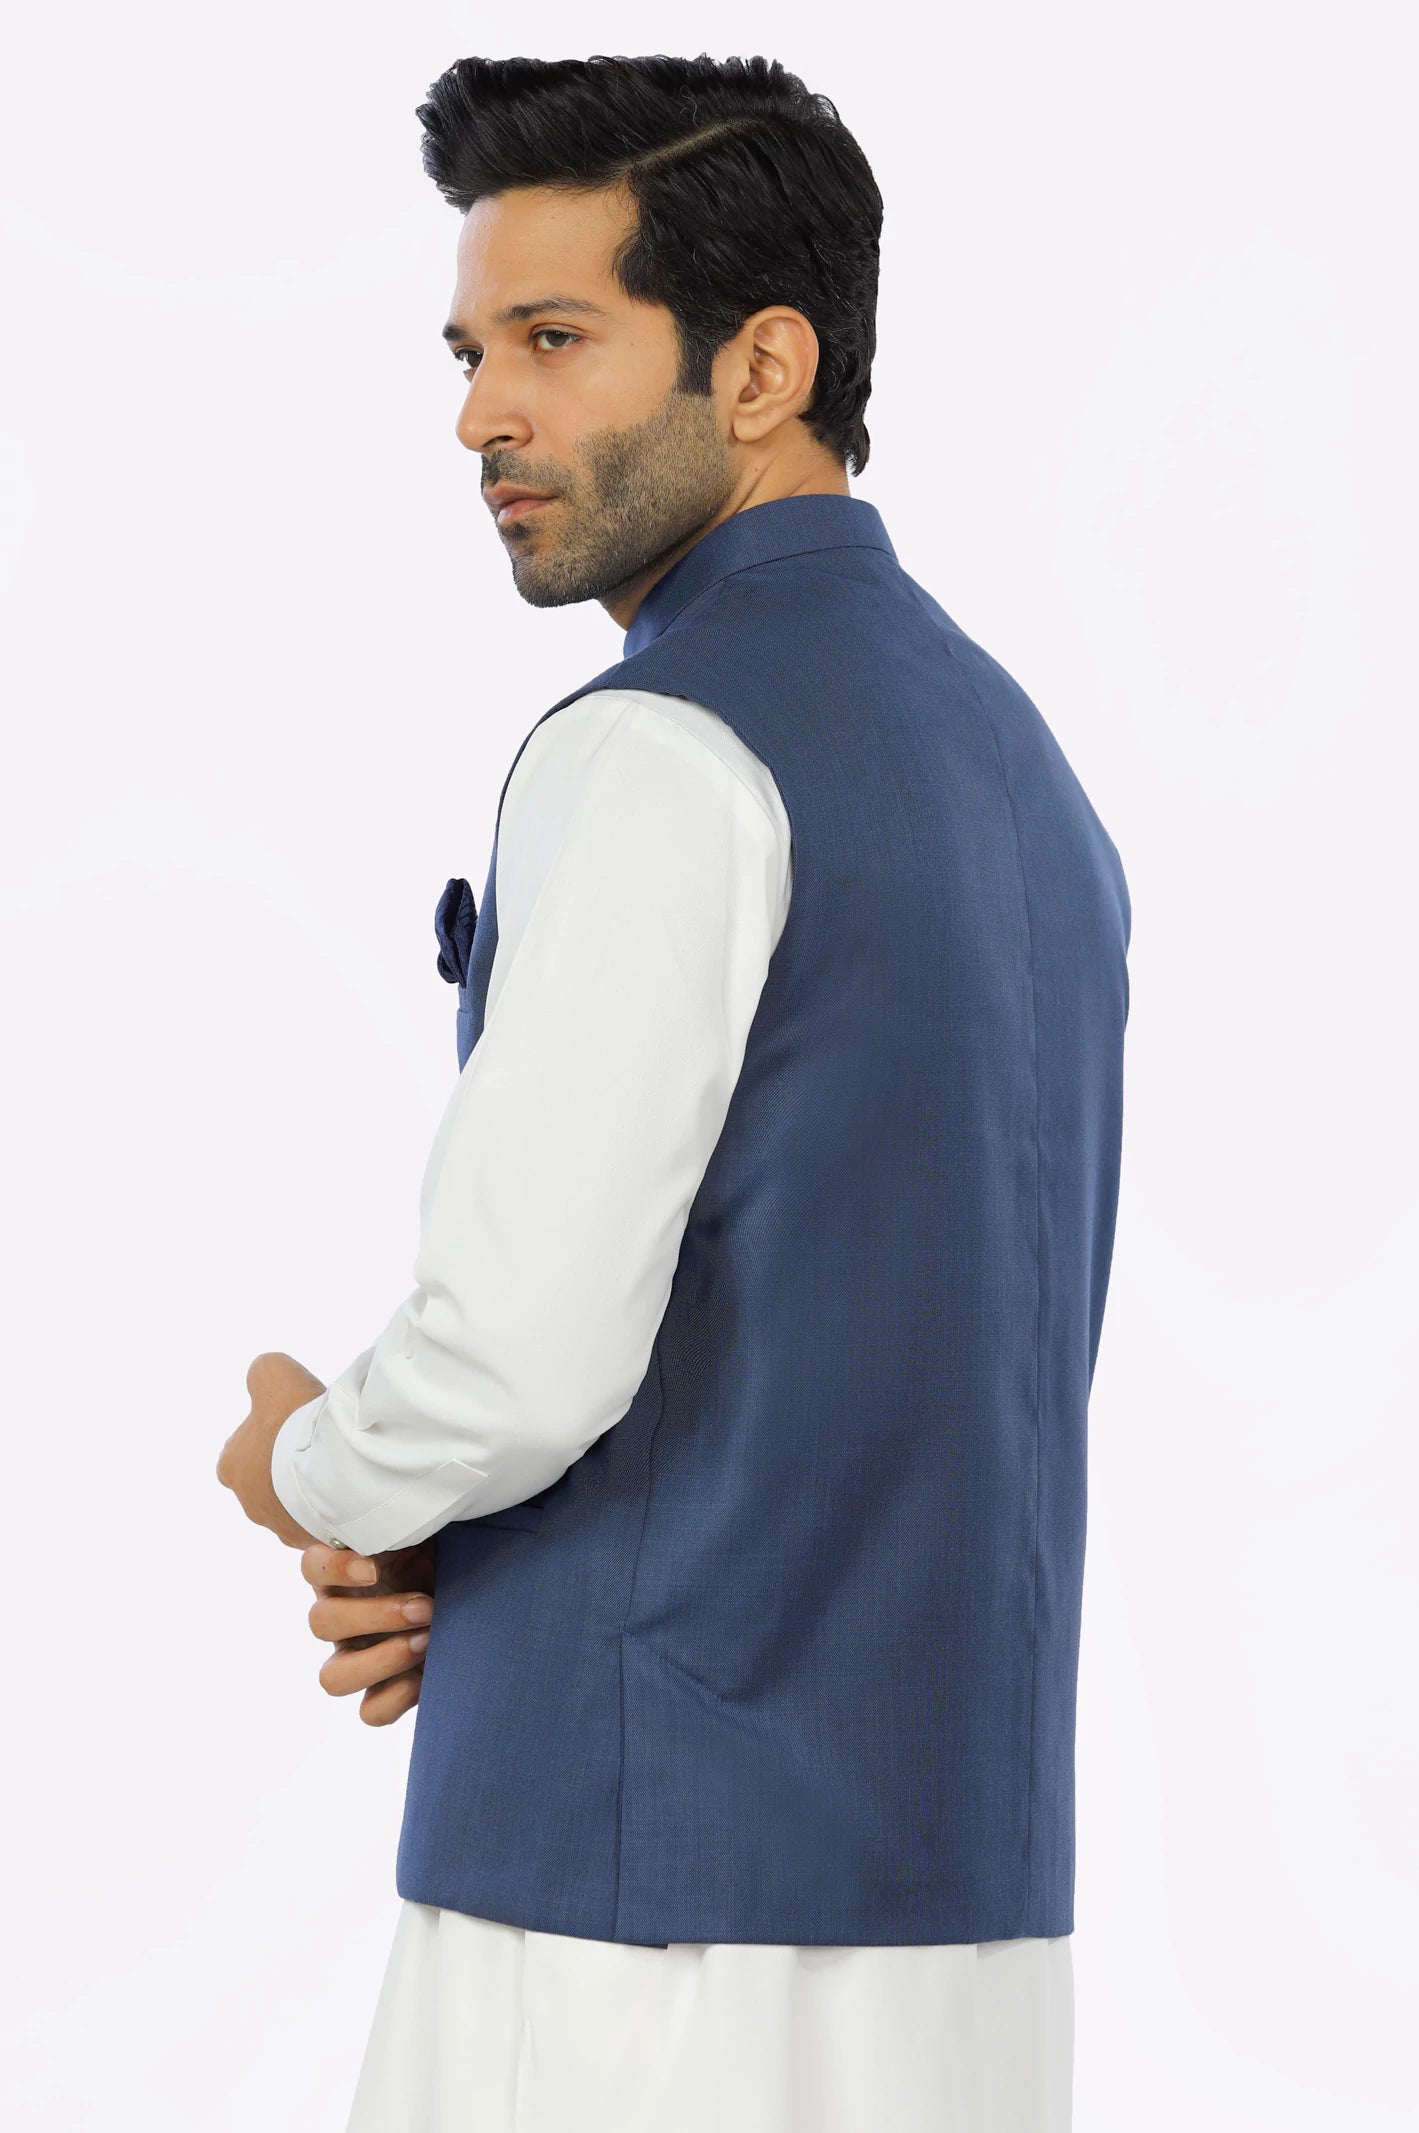 Light Blue Waistcoat From Diners